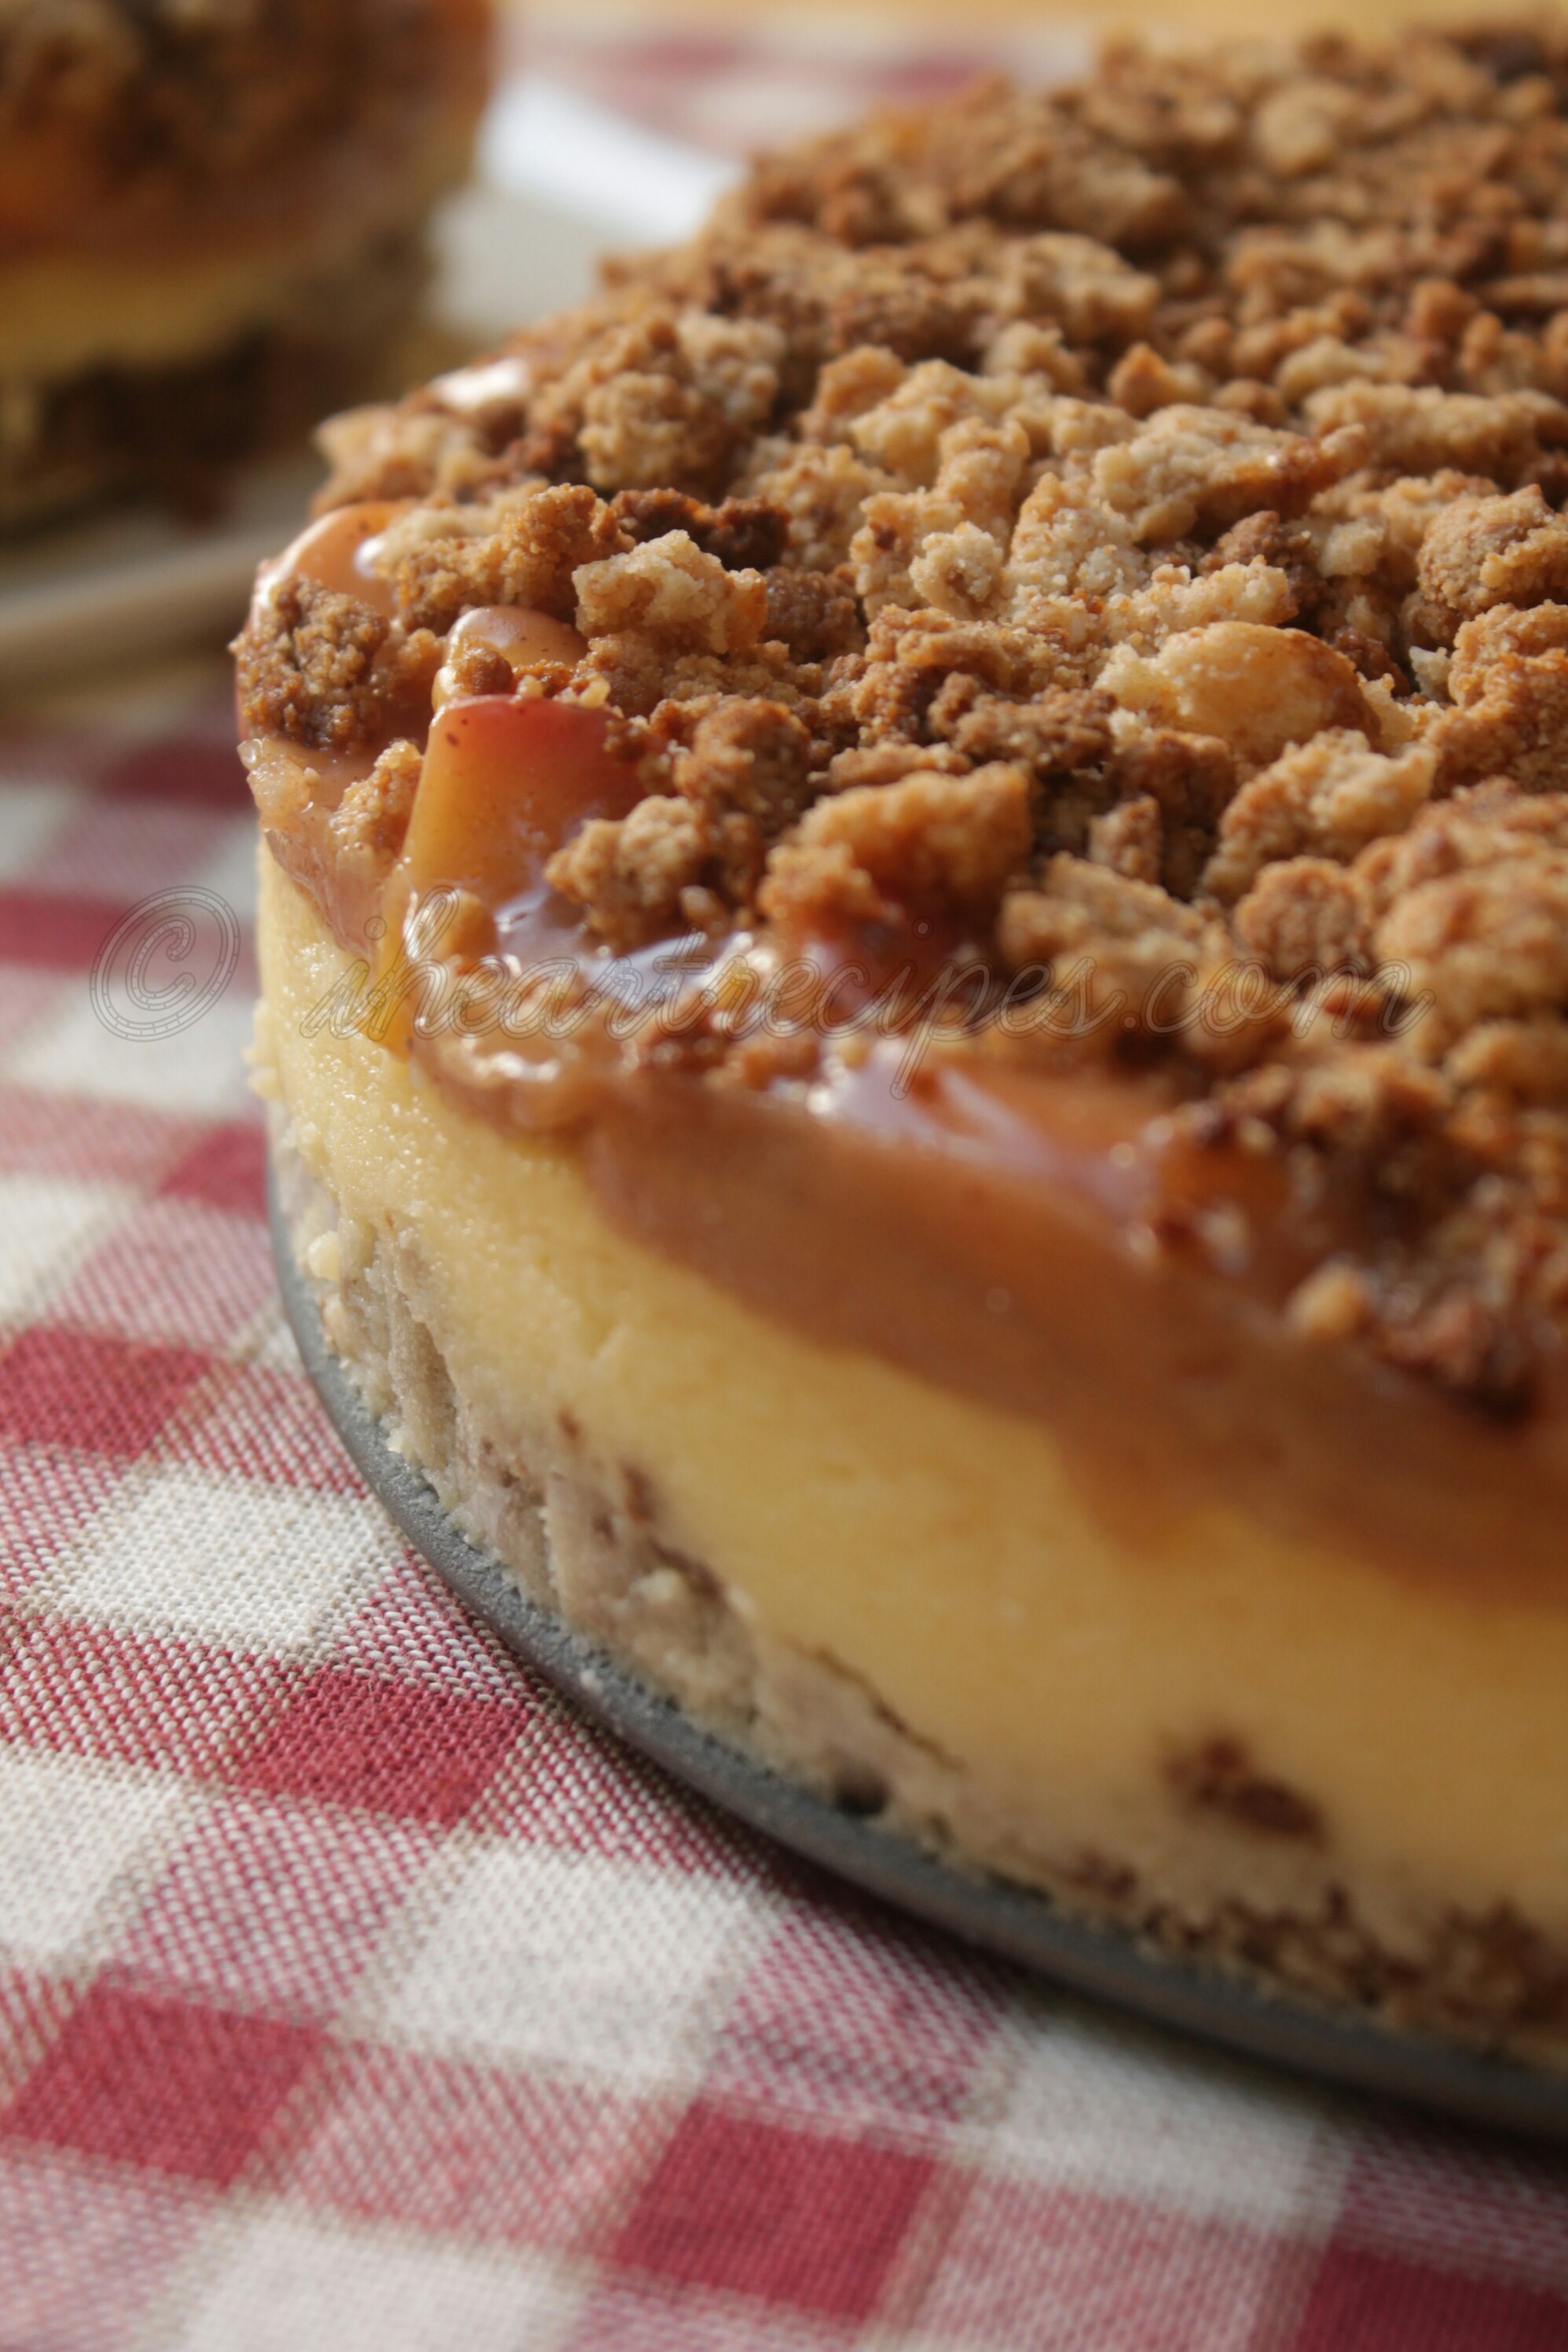 A close-up image of the sides of a peach cobbler cheesecake, showing each delicious layer of graham cracker crust, creamy cheesecake, sweet peach filling, and a buttery crumble topping.